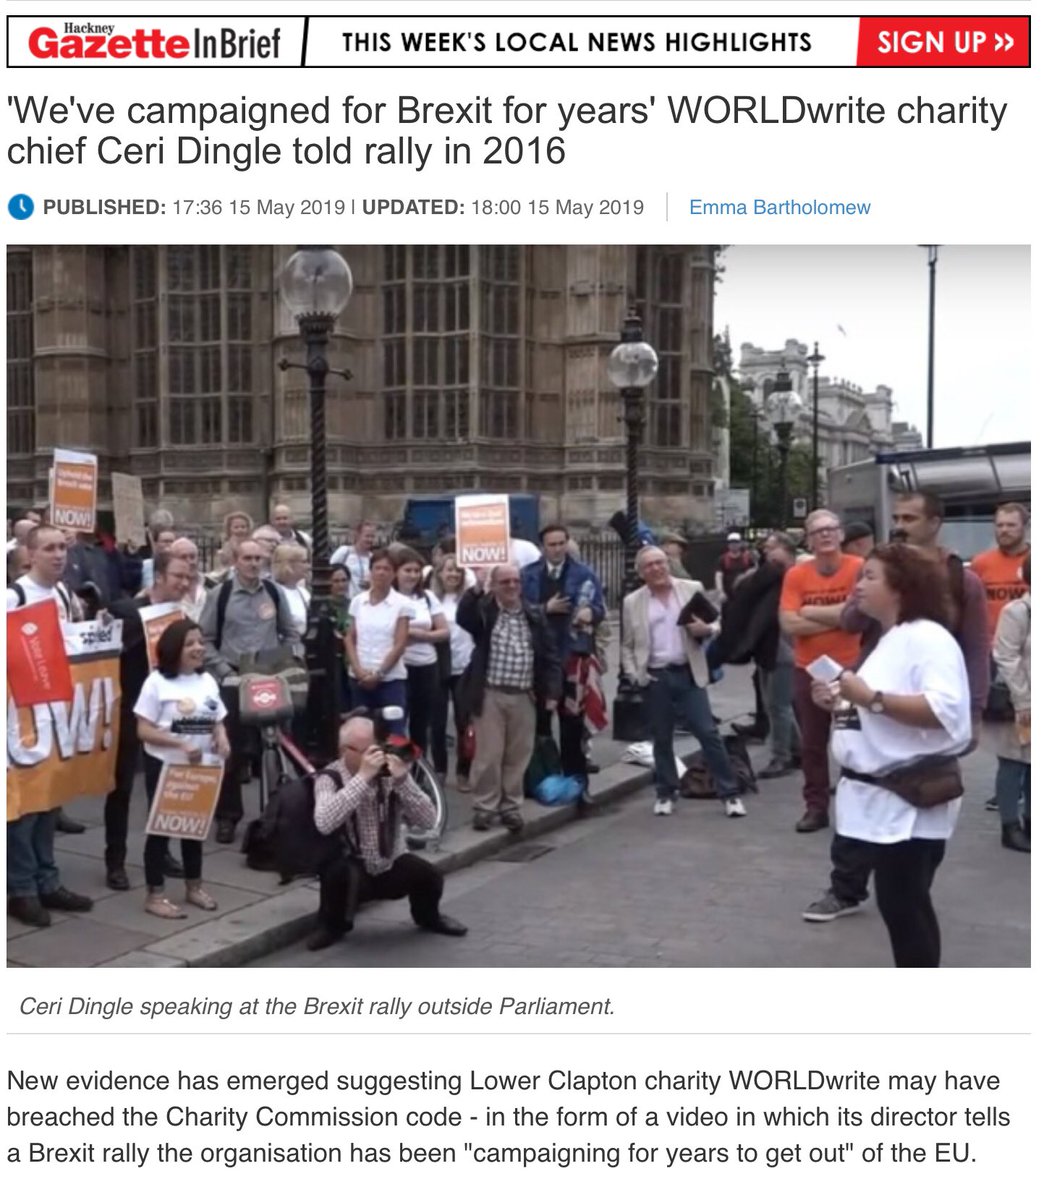 Another educational charity Spiked is connected to: WORLDwrite, directed by former RCP candidate Ceri Dingle. Mirza worked for it in the 2000s. It pushes pro-Brexit ideology to schoolkids. See  @EmmaReporter:  https://www.hackneygazette.co.uk/news/worldwrite-s-pro-brexit-anti-feminist-anti-environmental-videos-spark-concern-1-6029020  https://www.hackneygazette.co.uk/news/worldwrite-charity-chief-ceri-dingle-at-2016-brexit-rally-1-6052821  http://powerbase.info/index.php/WORLDwrite